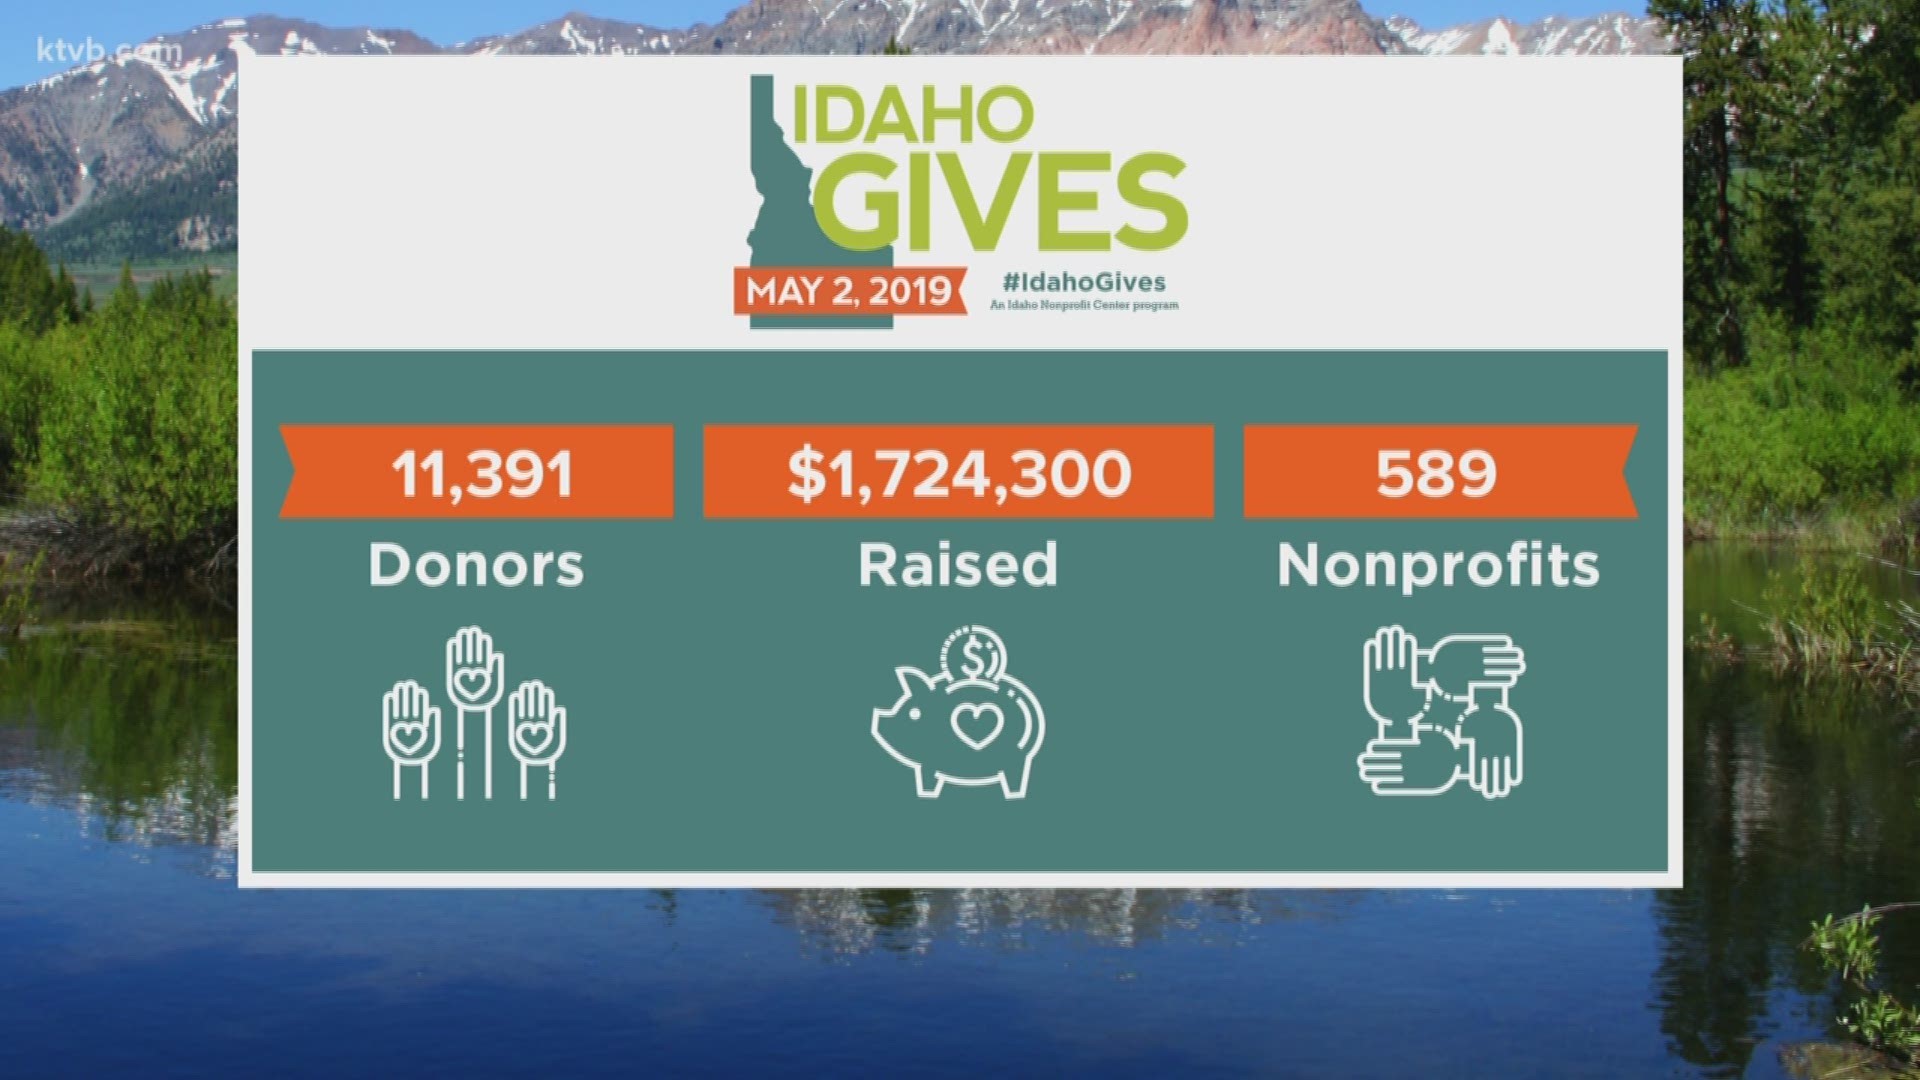 Idaho Gives broke its previous record, set last year, by almost $200,000.